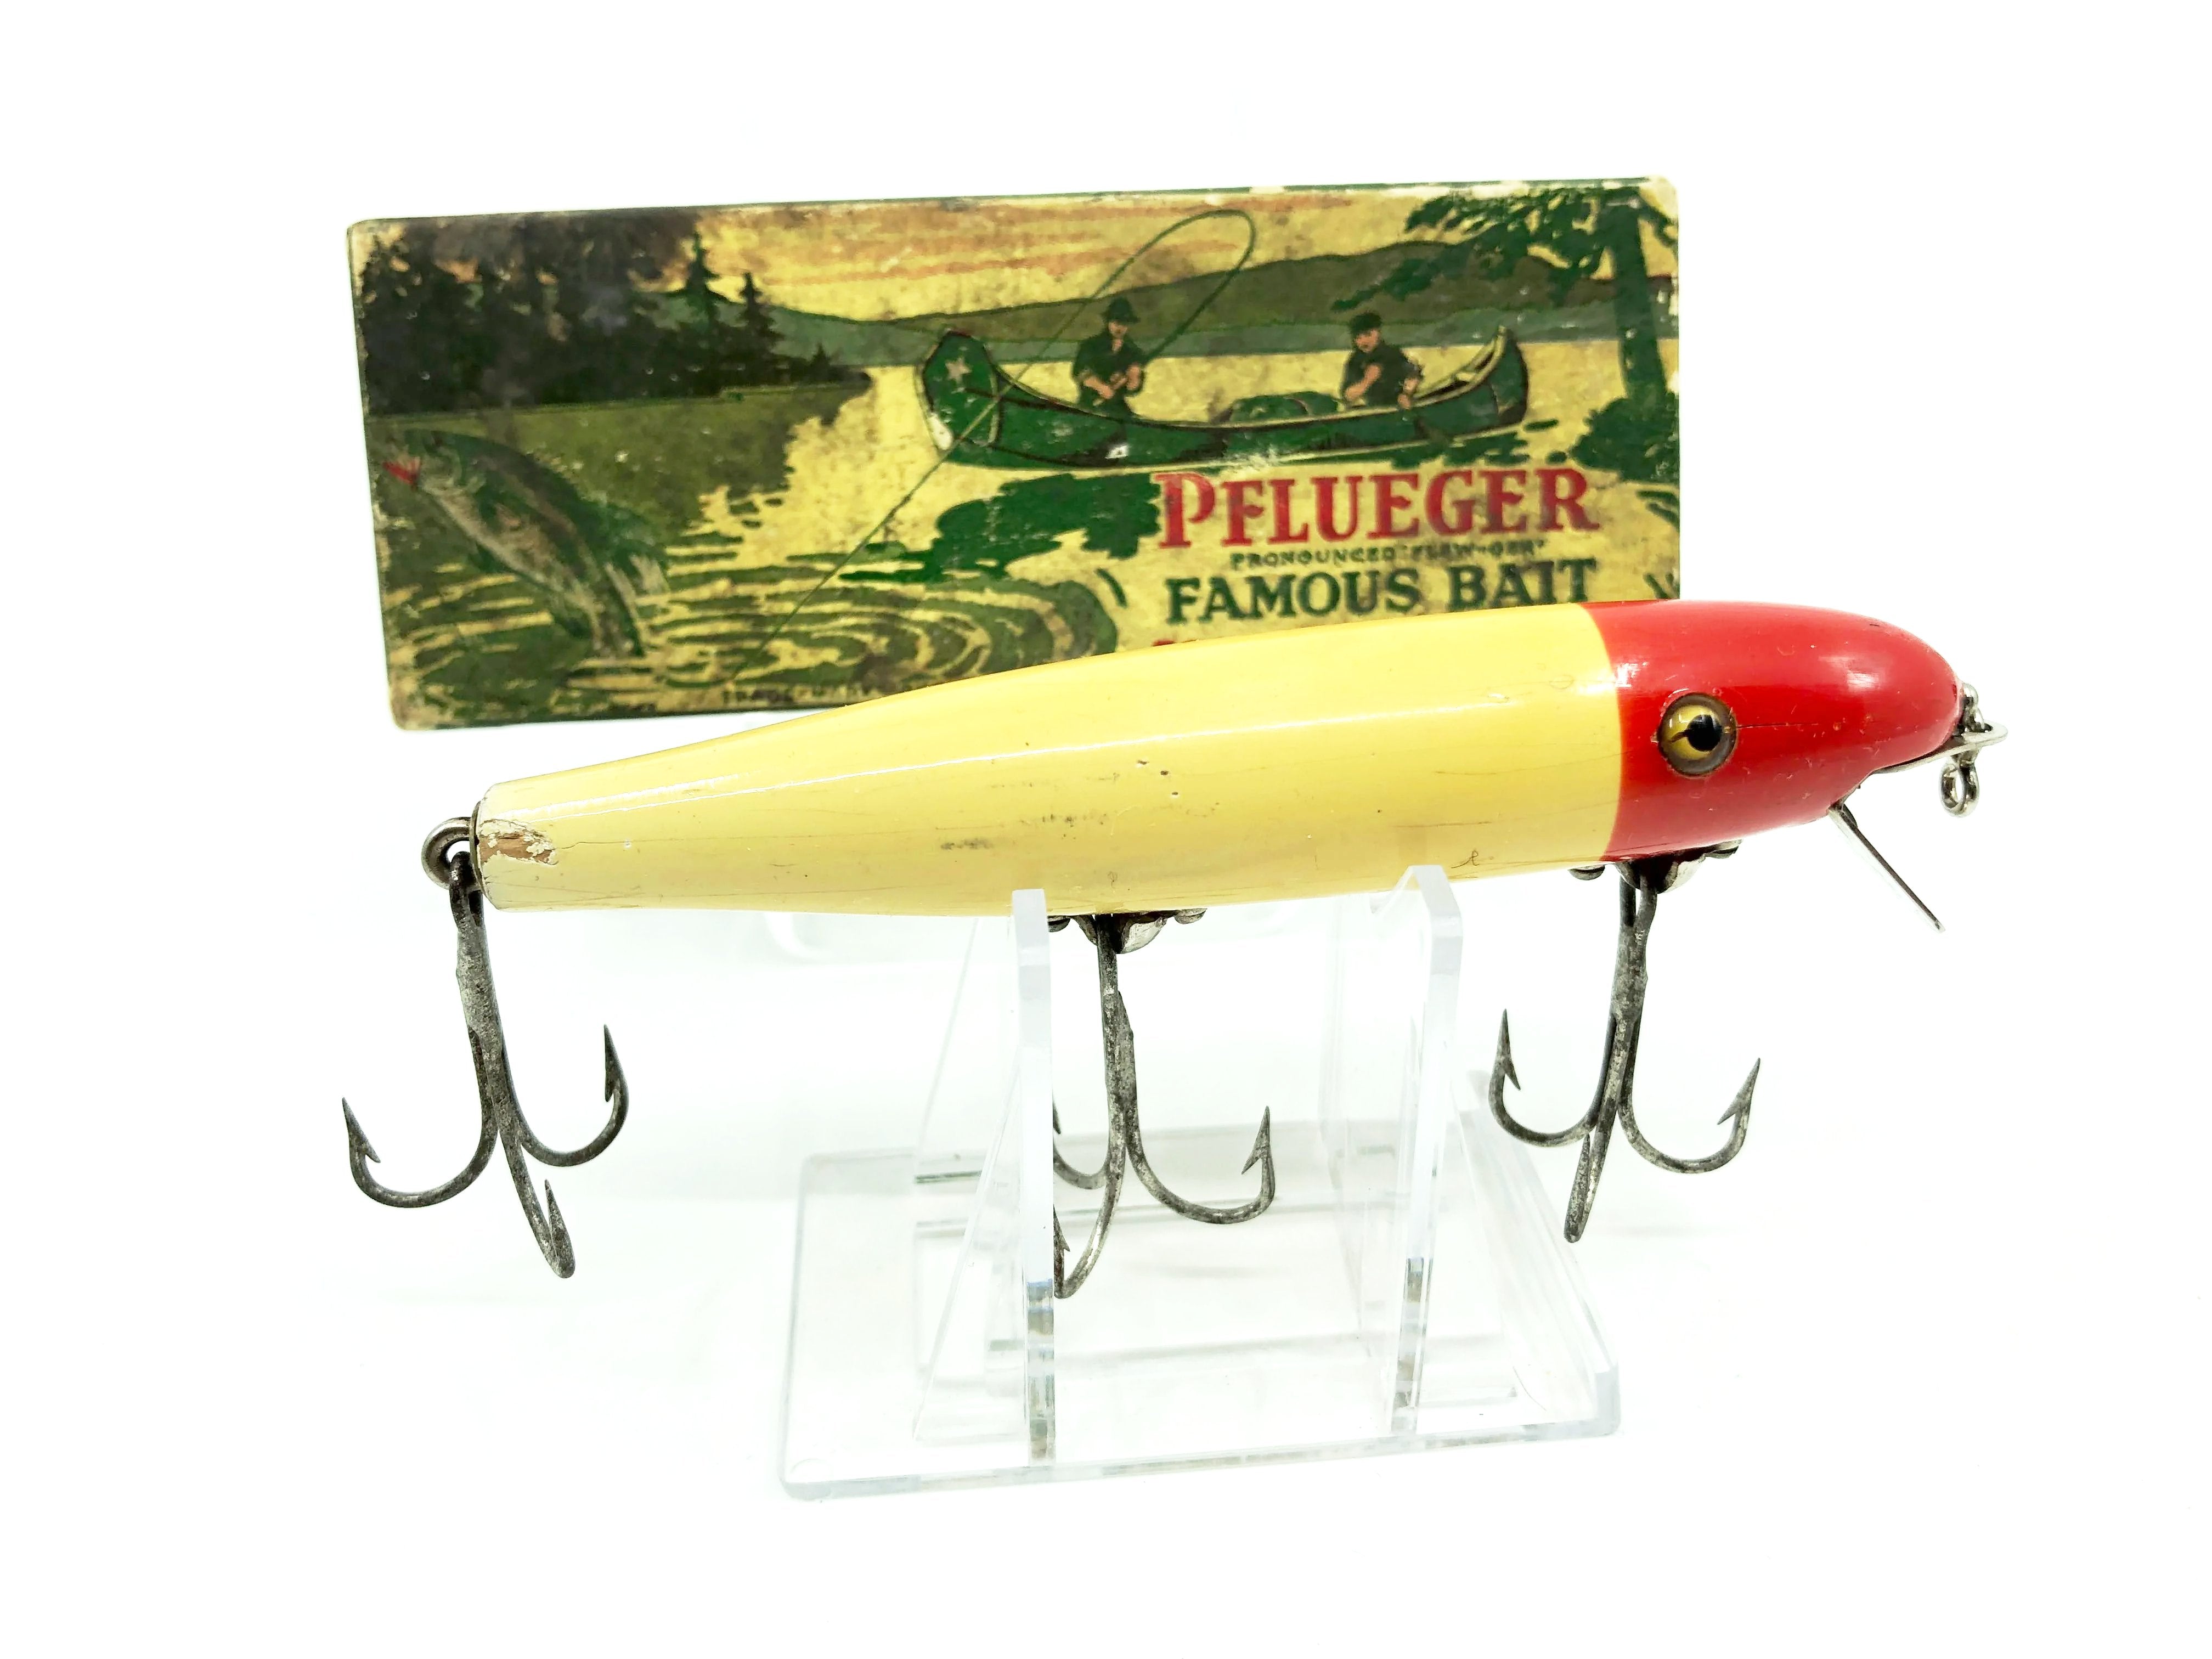 VINTAGE WOODEN GLASS eyed PFLUEGER PALOMINE LURE MINT CONDITION NEVER  HOOKED 2 $80.00 - PicClick